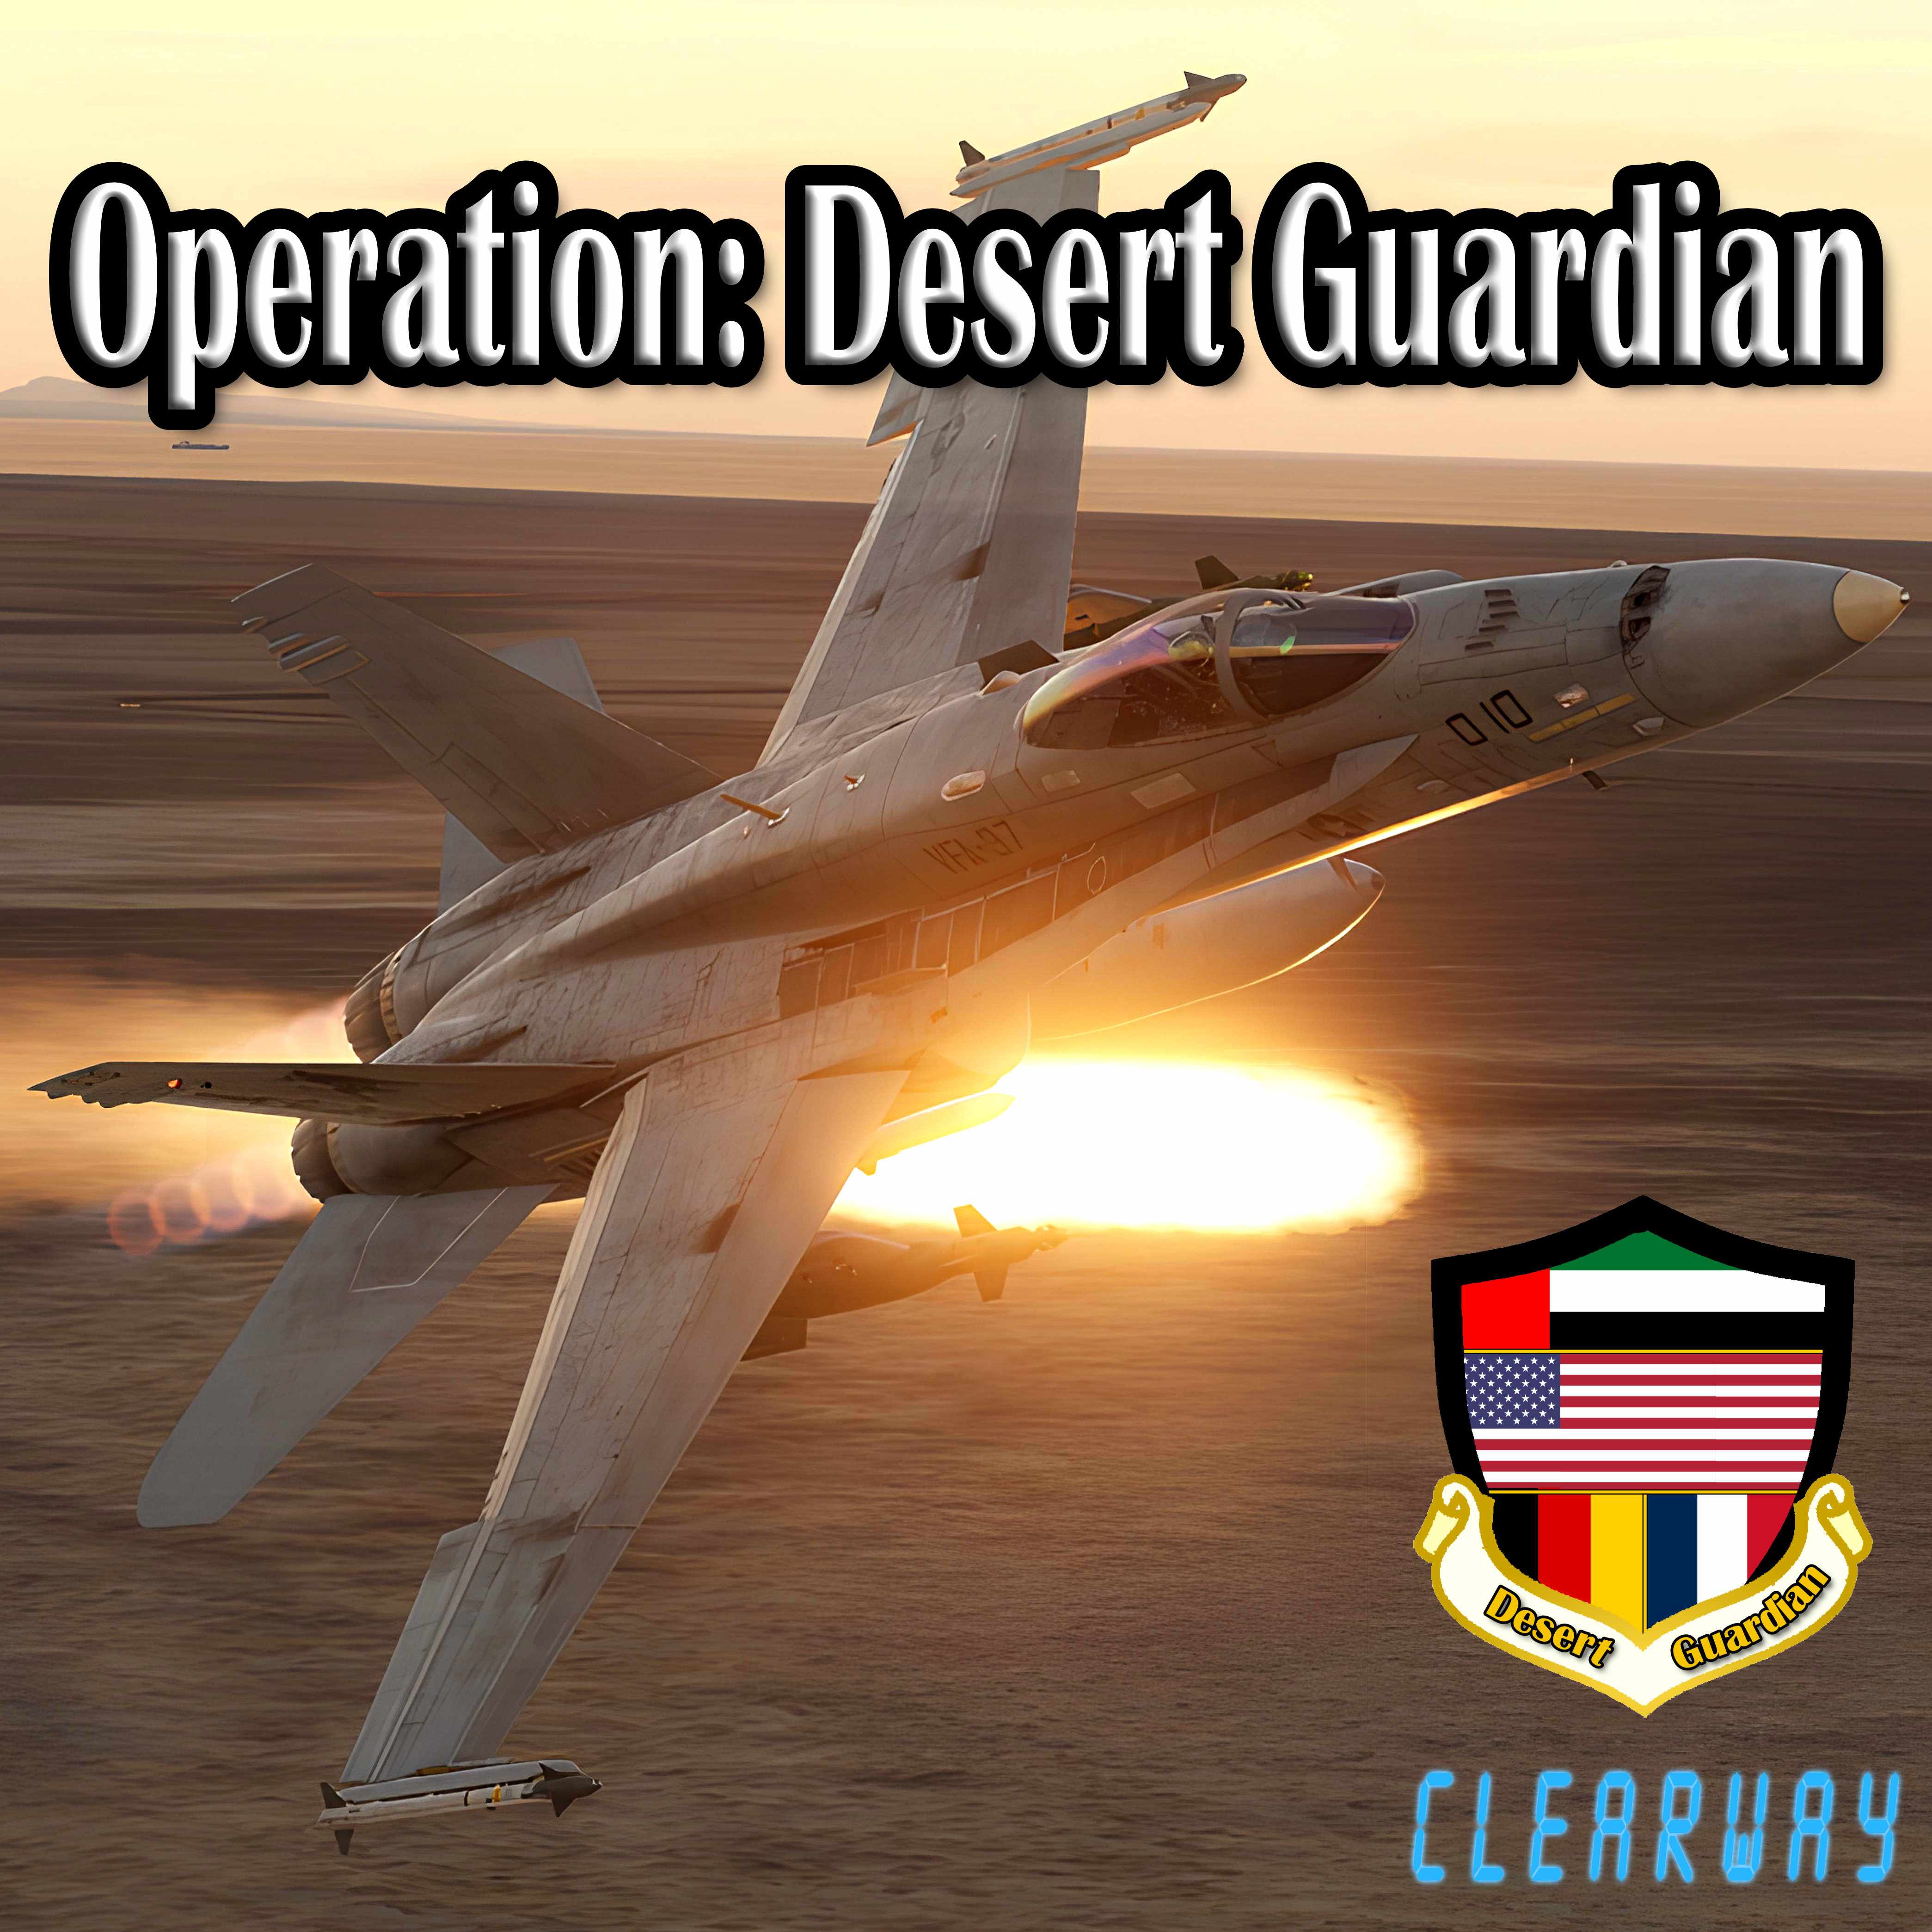 Operation Desert Guardian: Mission 1 "Welcome to the Desert"